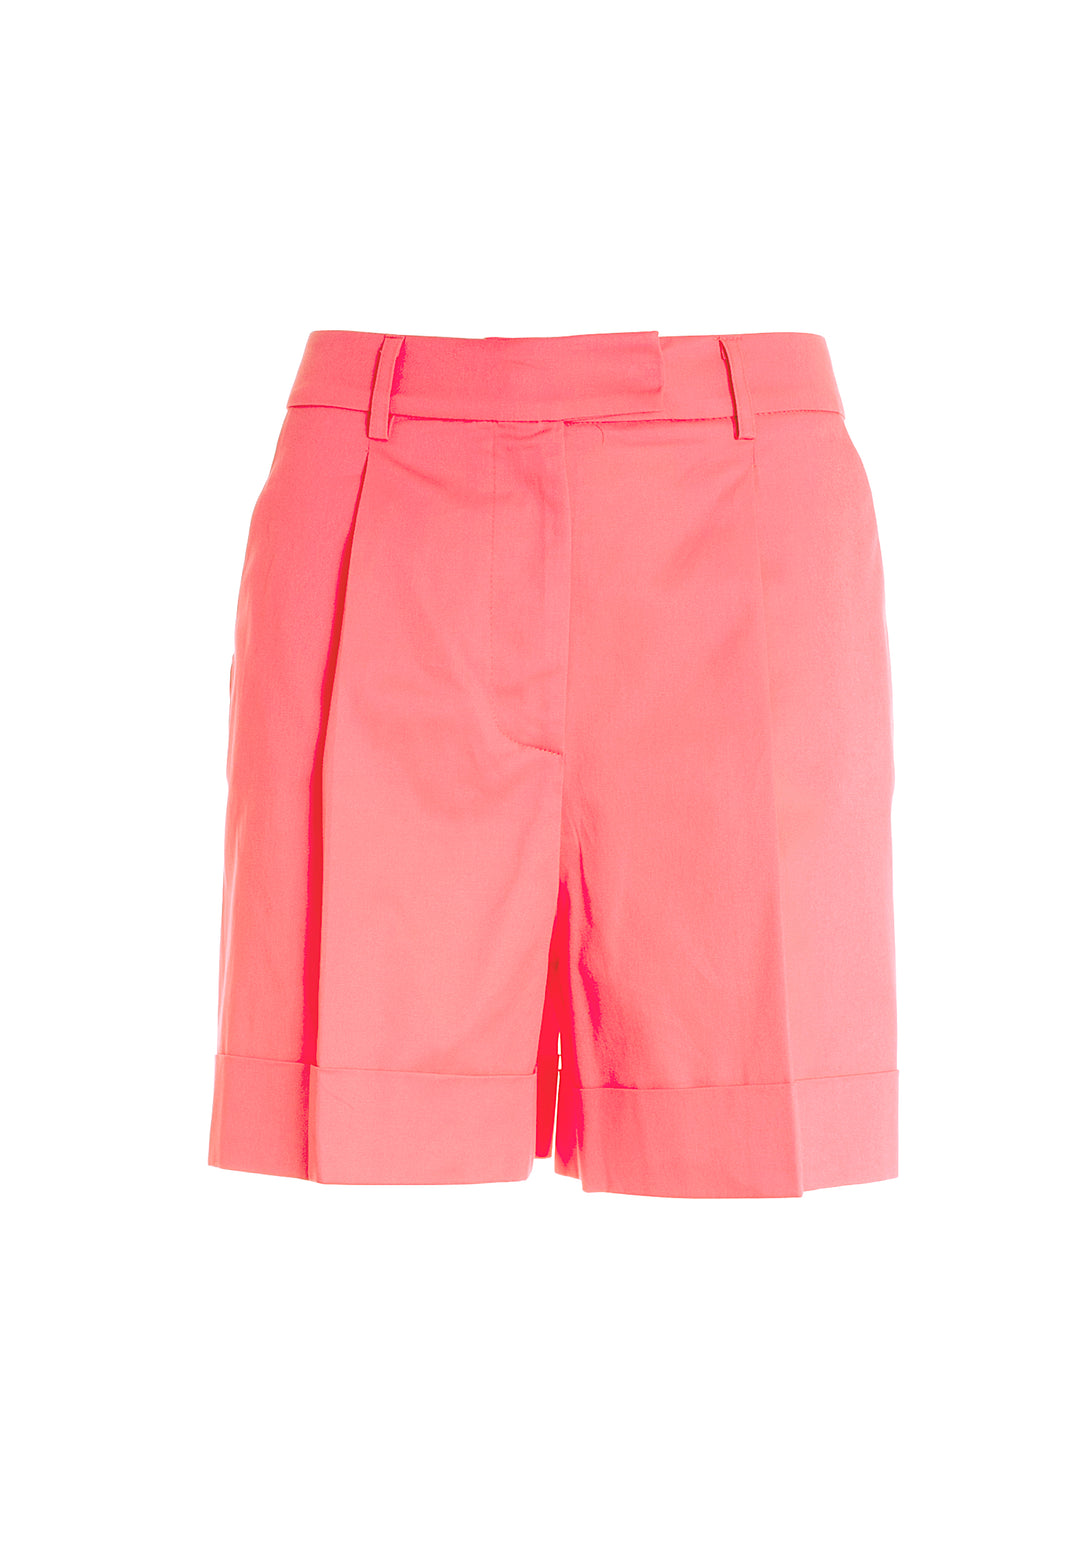 Short pant wide fit made in cotton